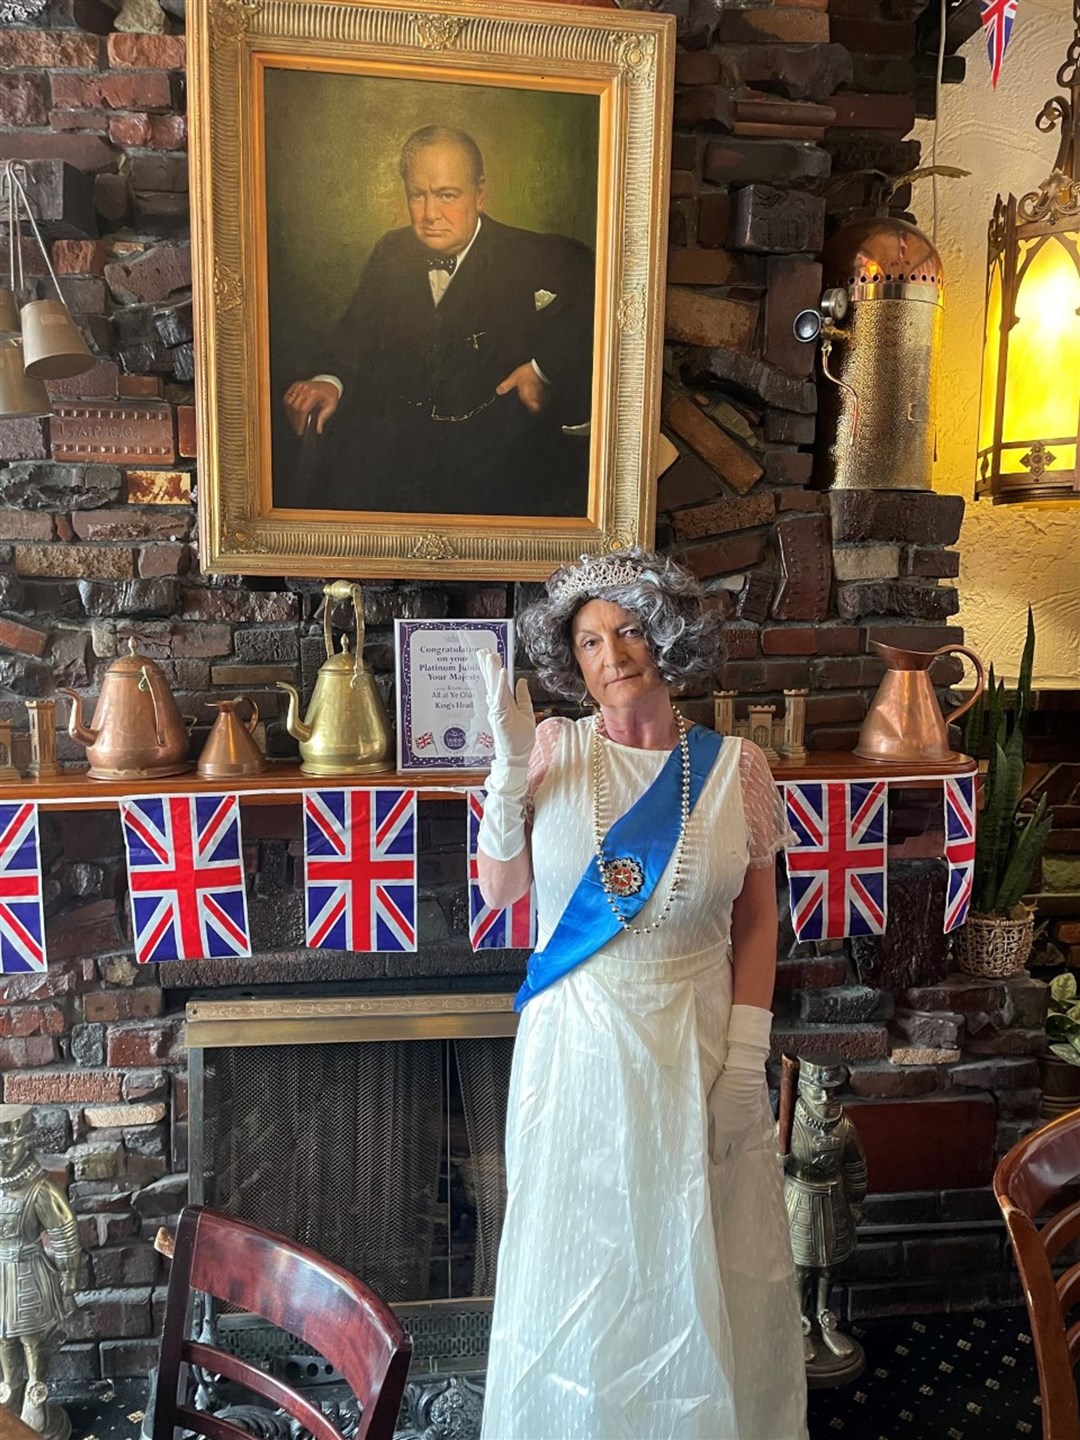 The pub has hired a Queen Elizabeth impersonator to stop by over the weekend (Lisa Powers/PA)